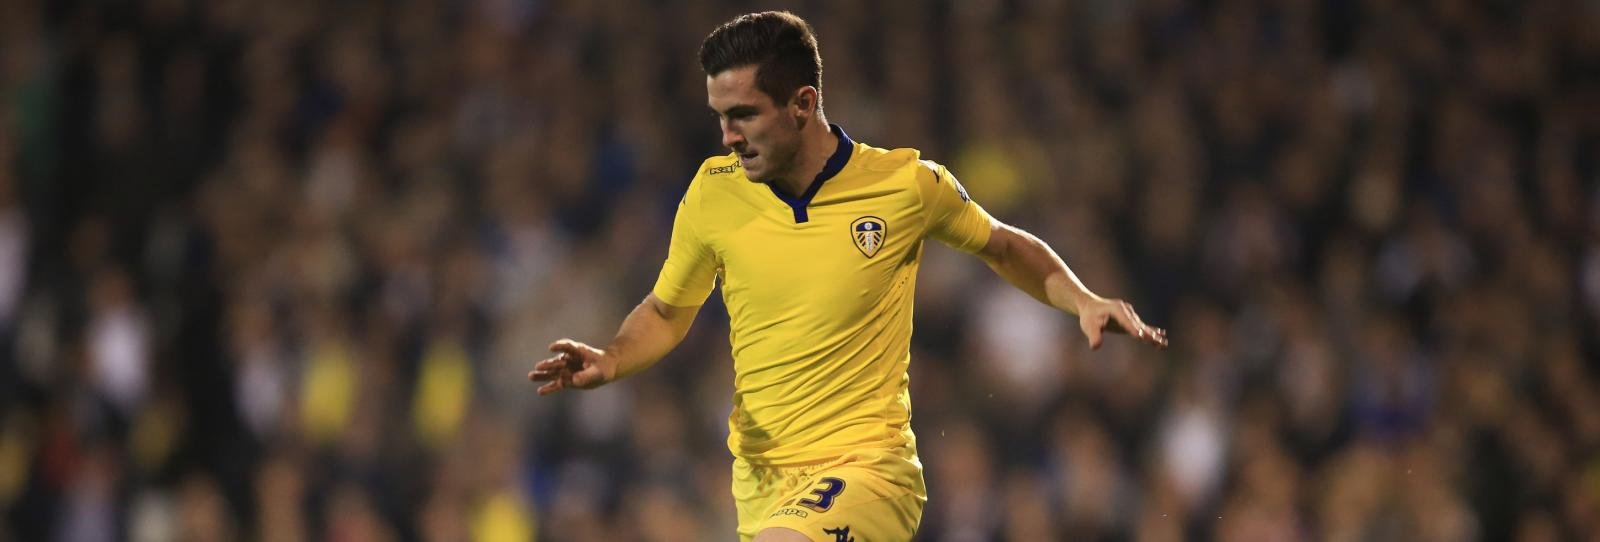 Done Deal: AFC Bournemouth land Leeds United’s Lewis Cook in a deal worth up to £10m